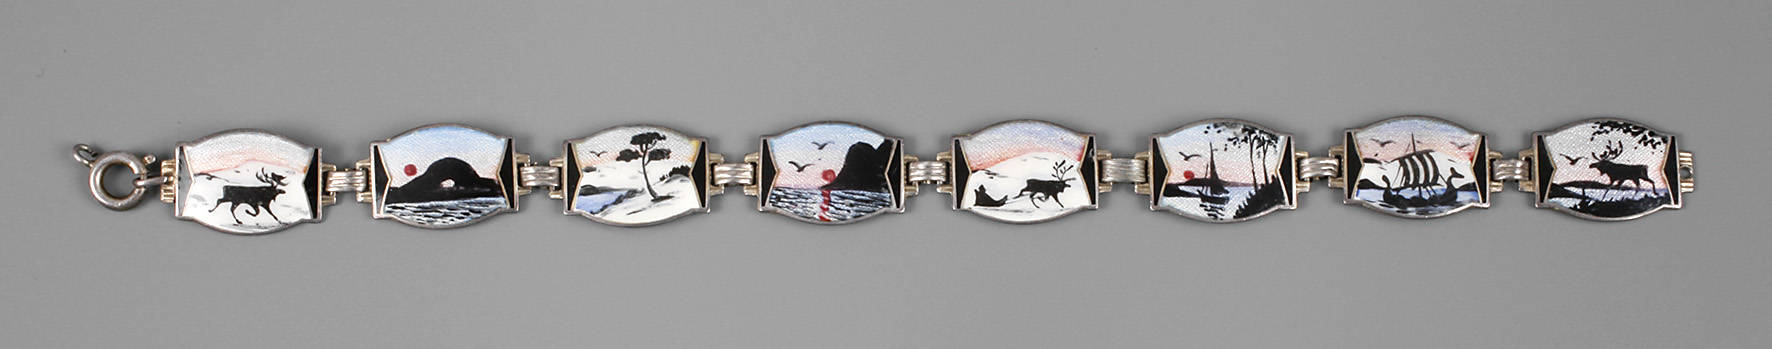 Aksel Holmsen Armband mit Emaille